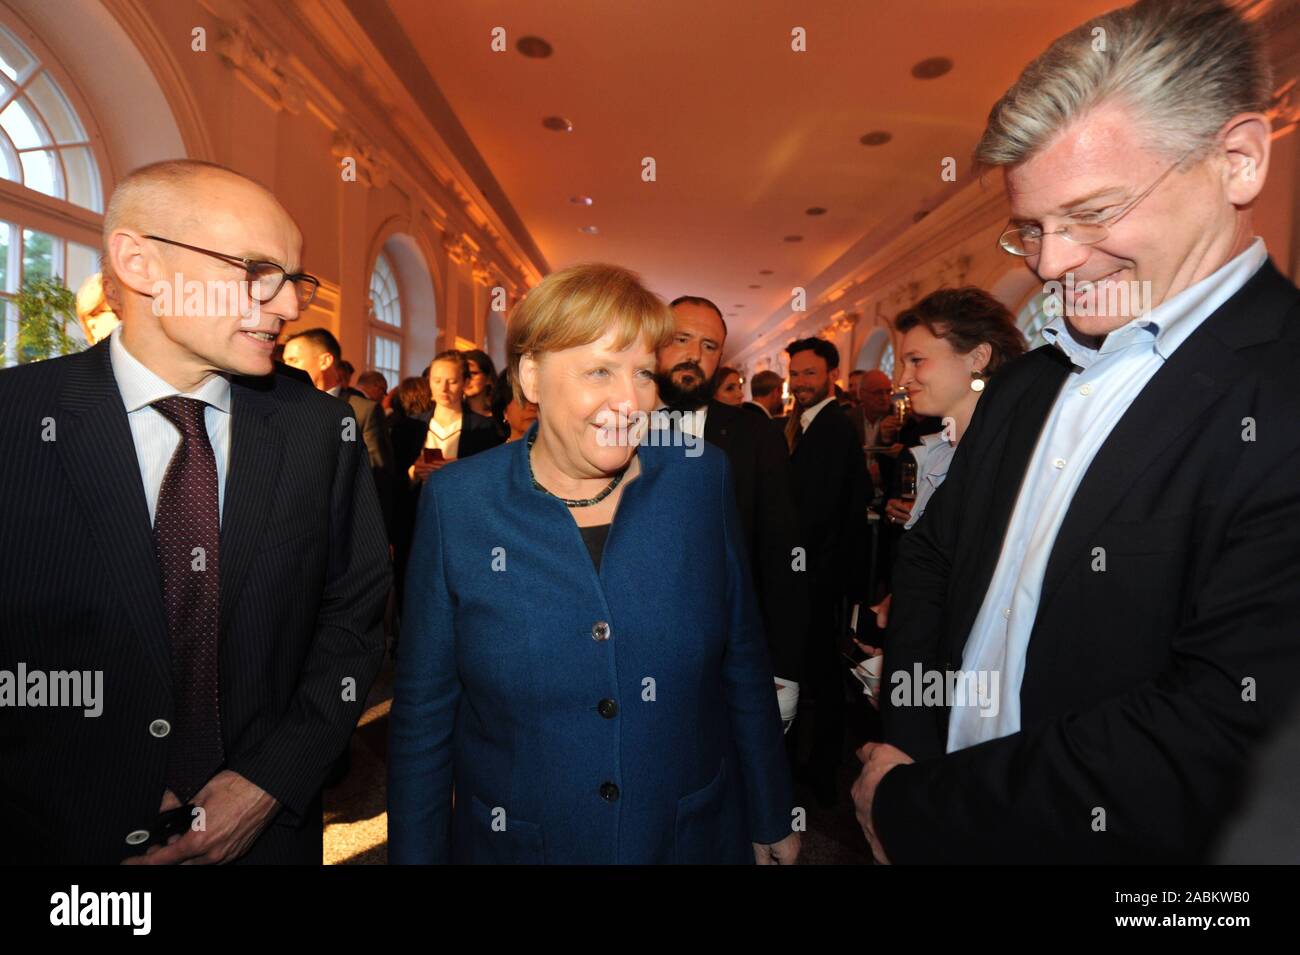 SZ Night in Berlin at Charlottenburg Palace: SZ Editor-in-Chief Christian Krach (left) and Angela Merkel , 6 May 2019 [automated translation] Stock Photo